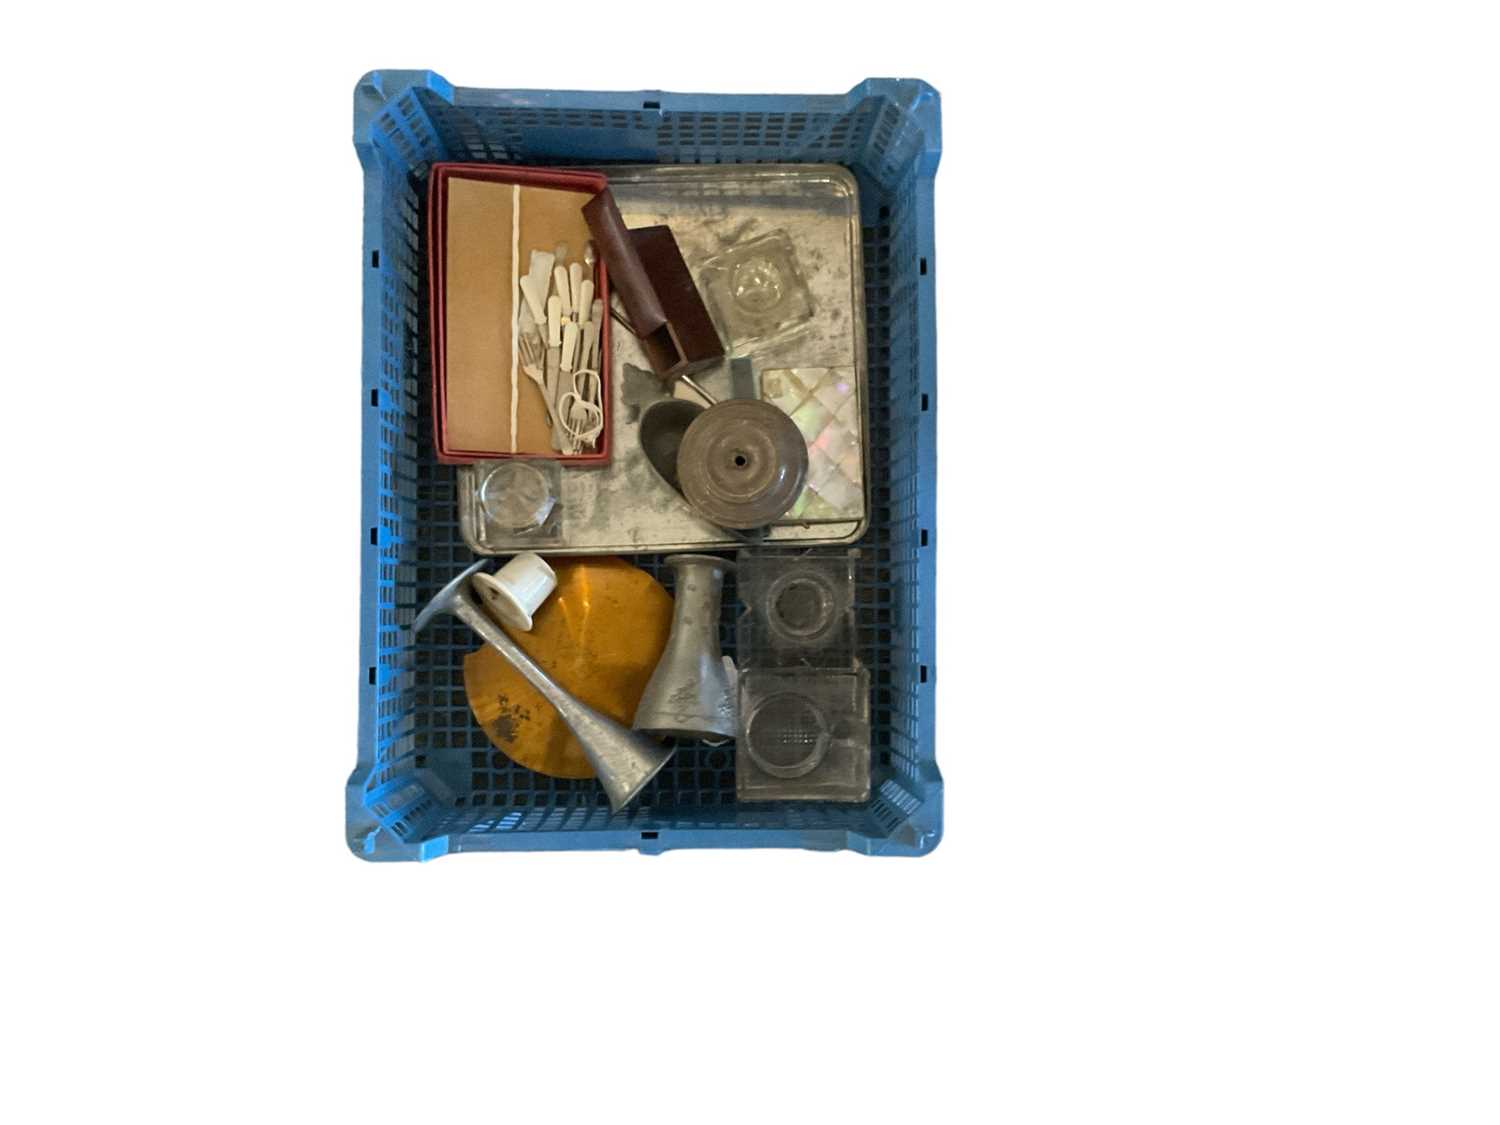 Card case, inkwells and sundries